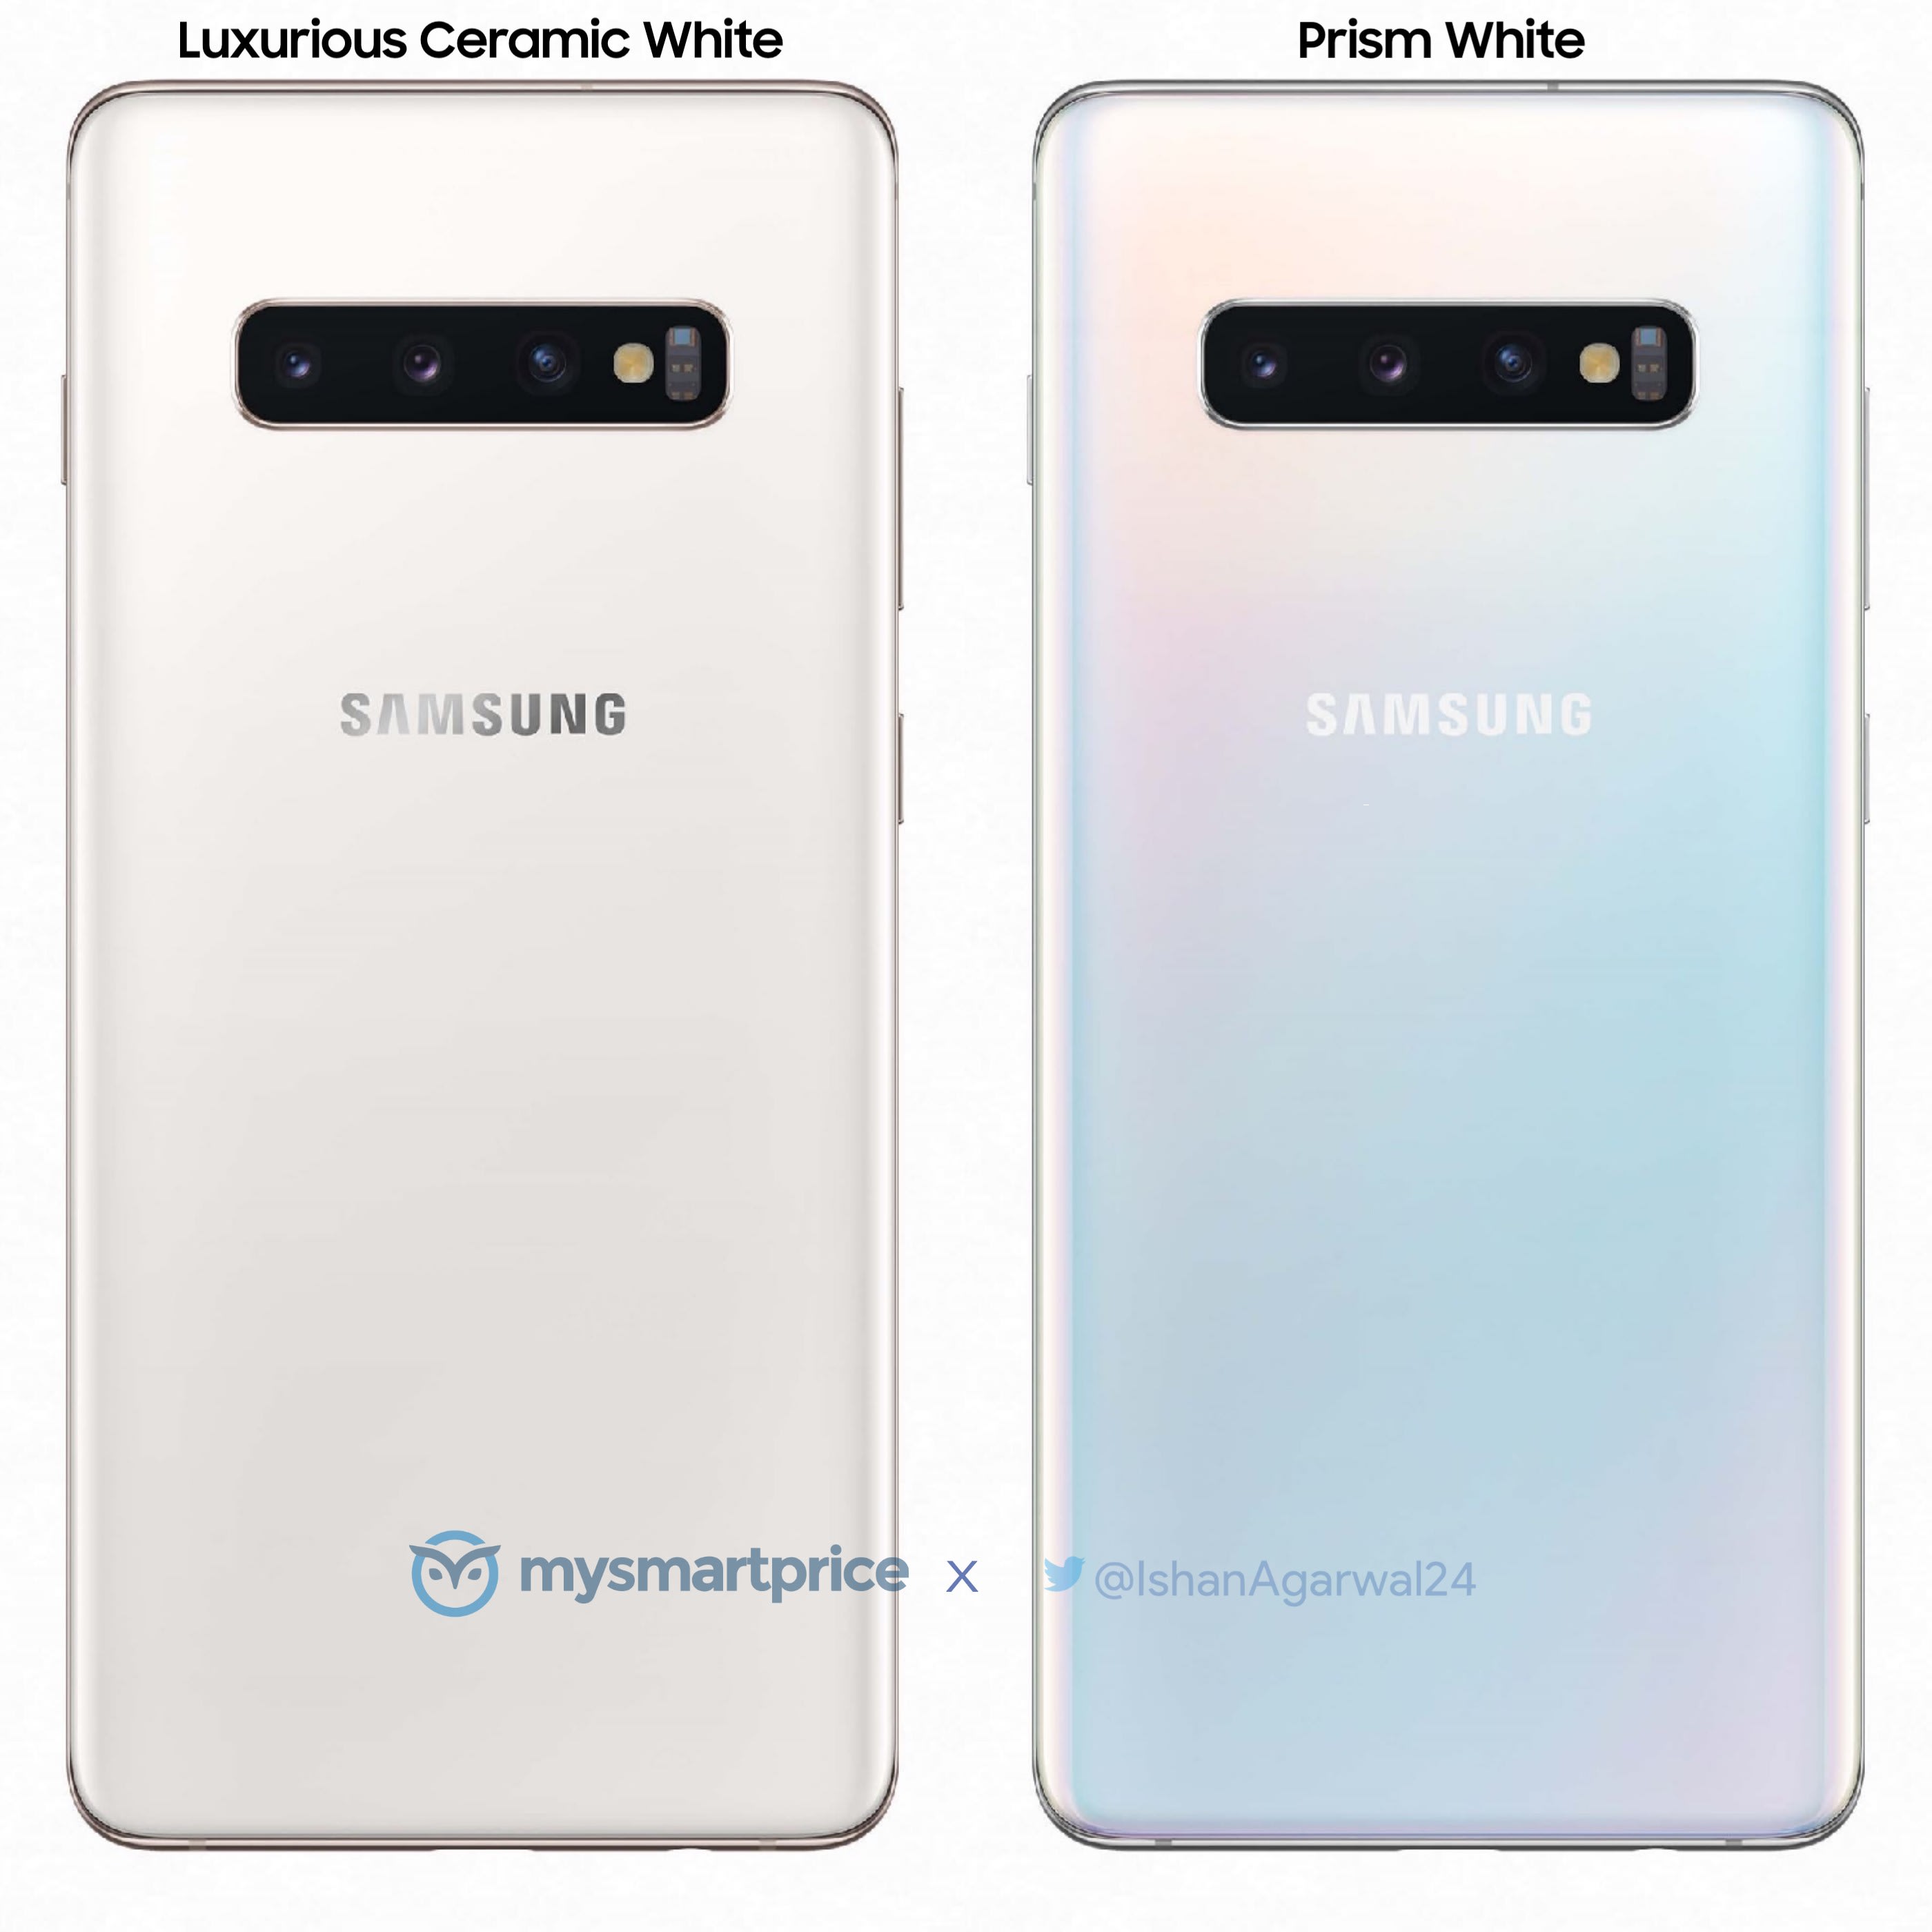 Galaxy S10 In Luxurious Ceramic White Revealed In Leaked Render